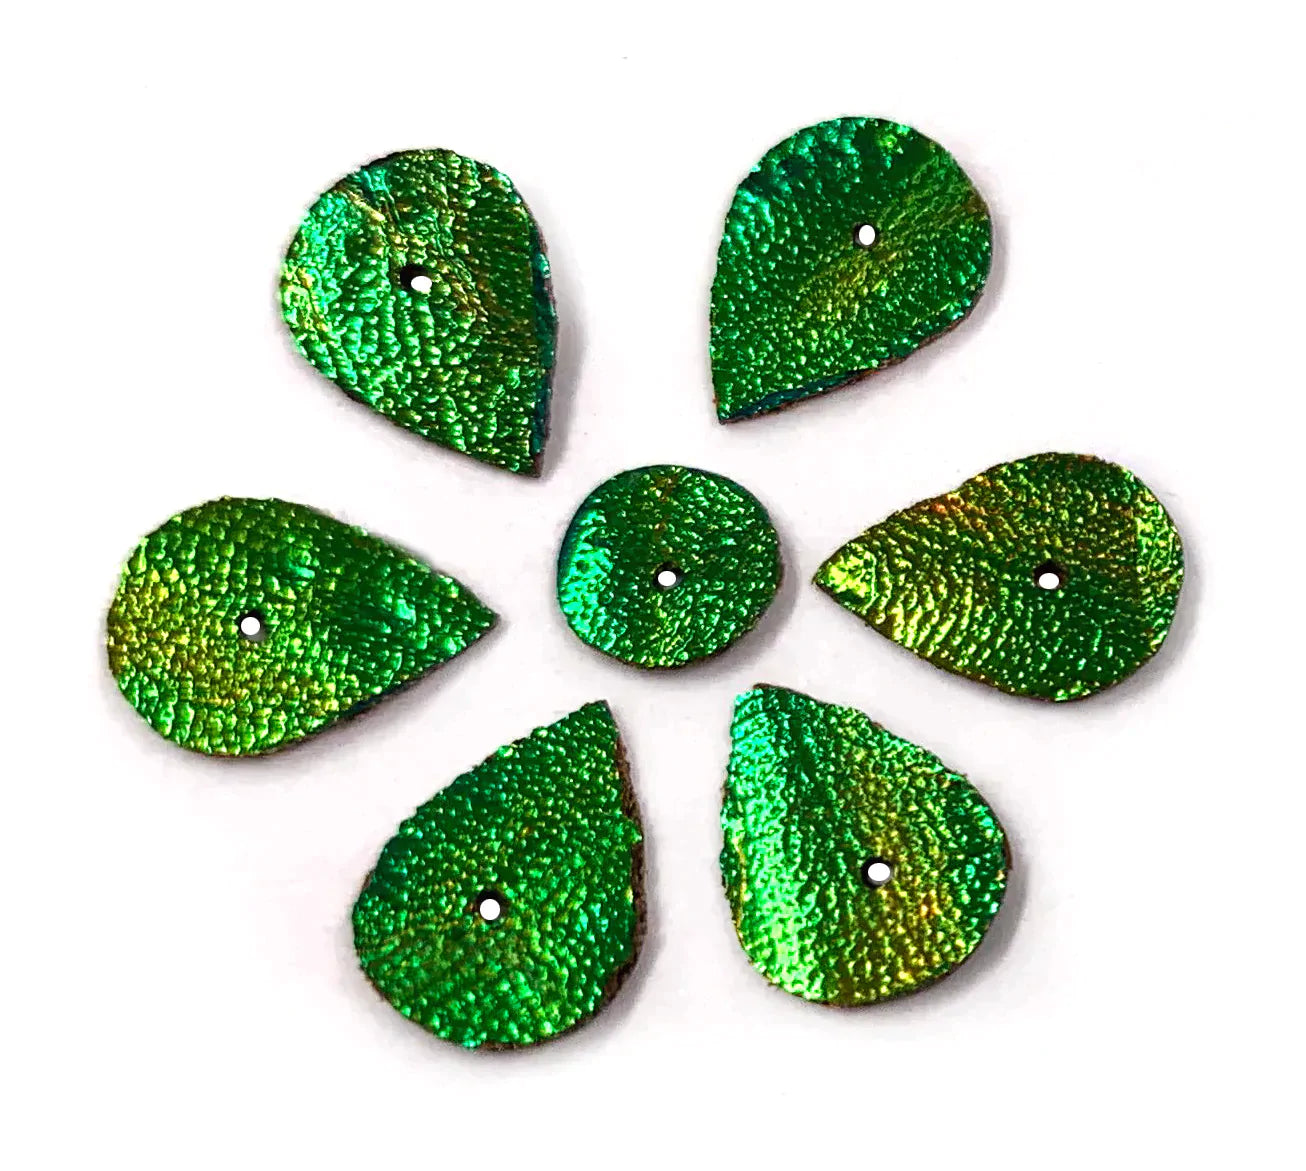 Jewel Beetle Wings UNDRILLED NO-HOLE 100 Pcs Natural Wings - Circle 6 MM